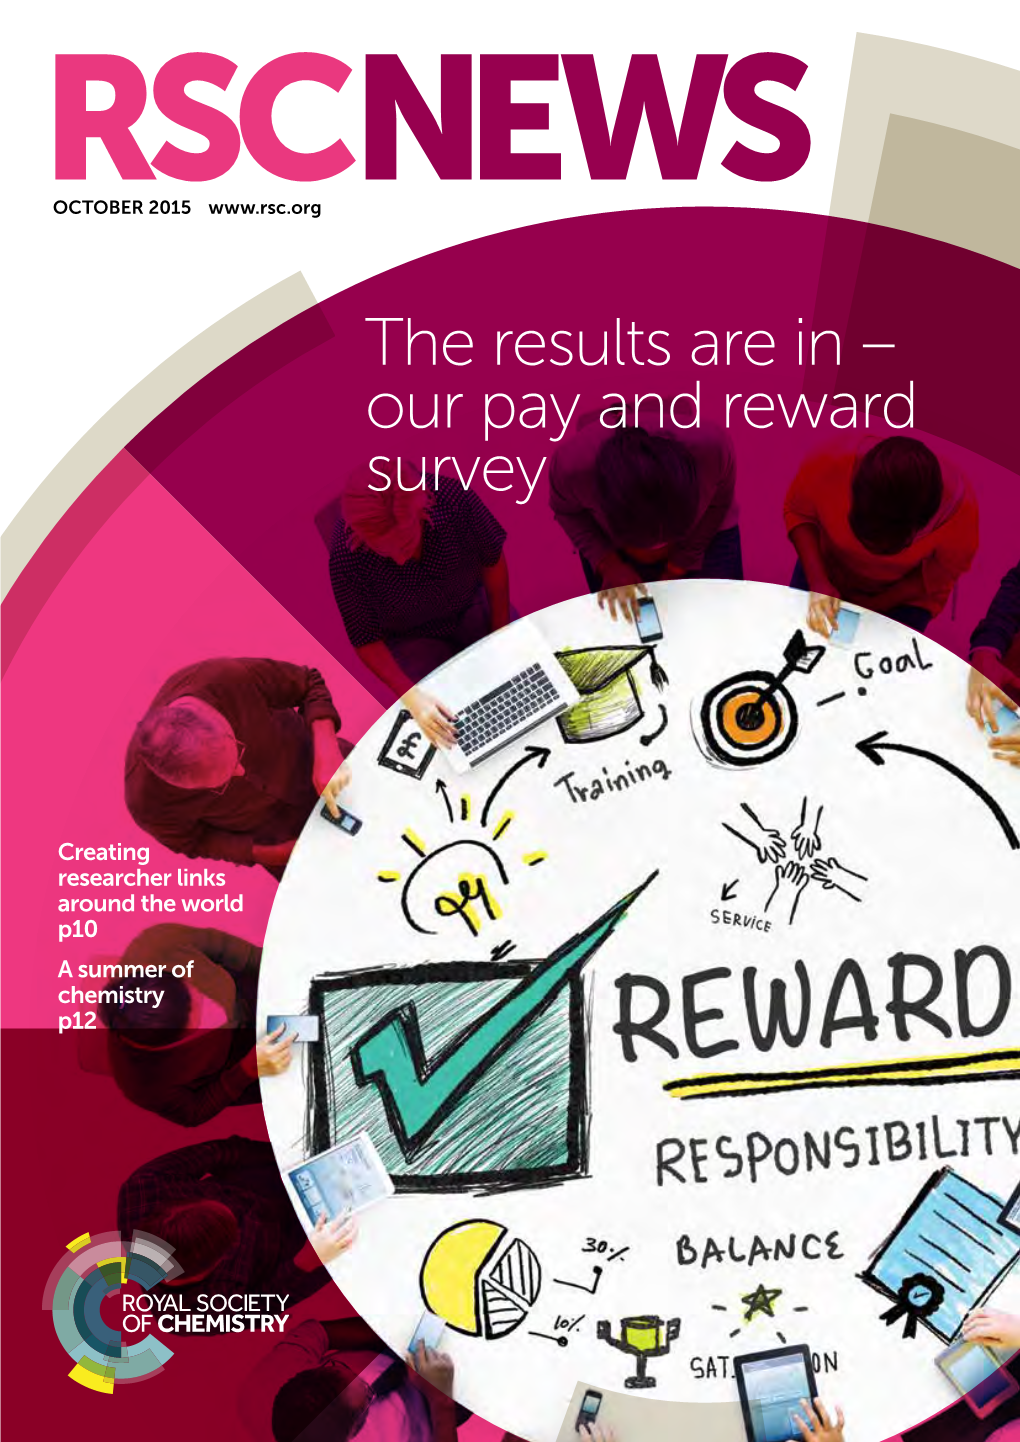 Our Pay and Reward Survey